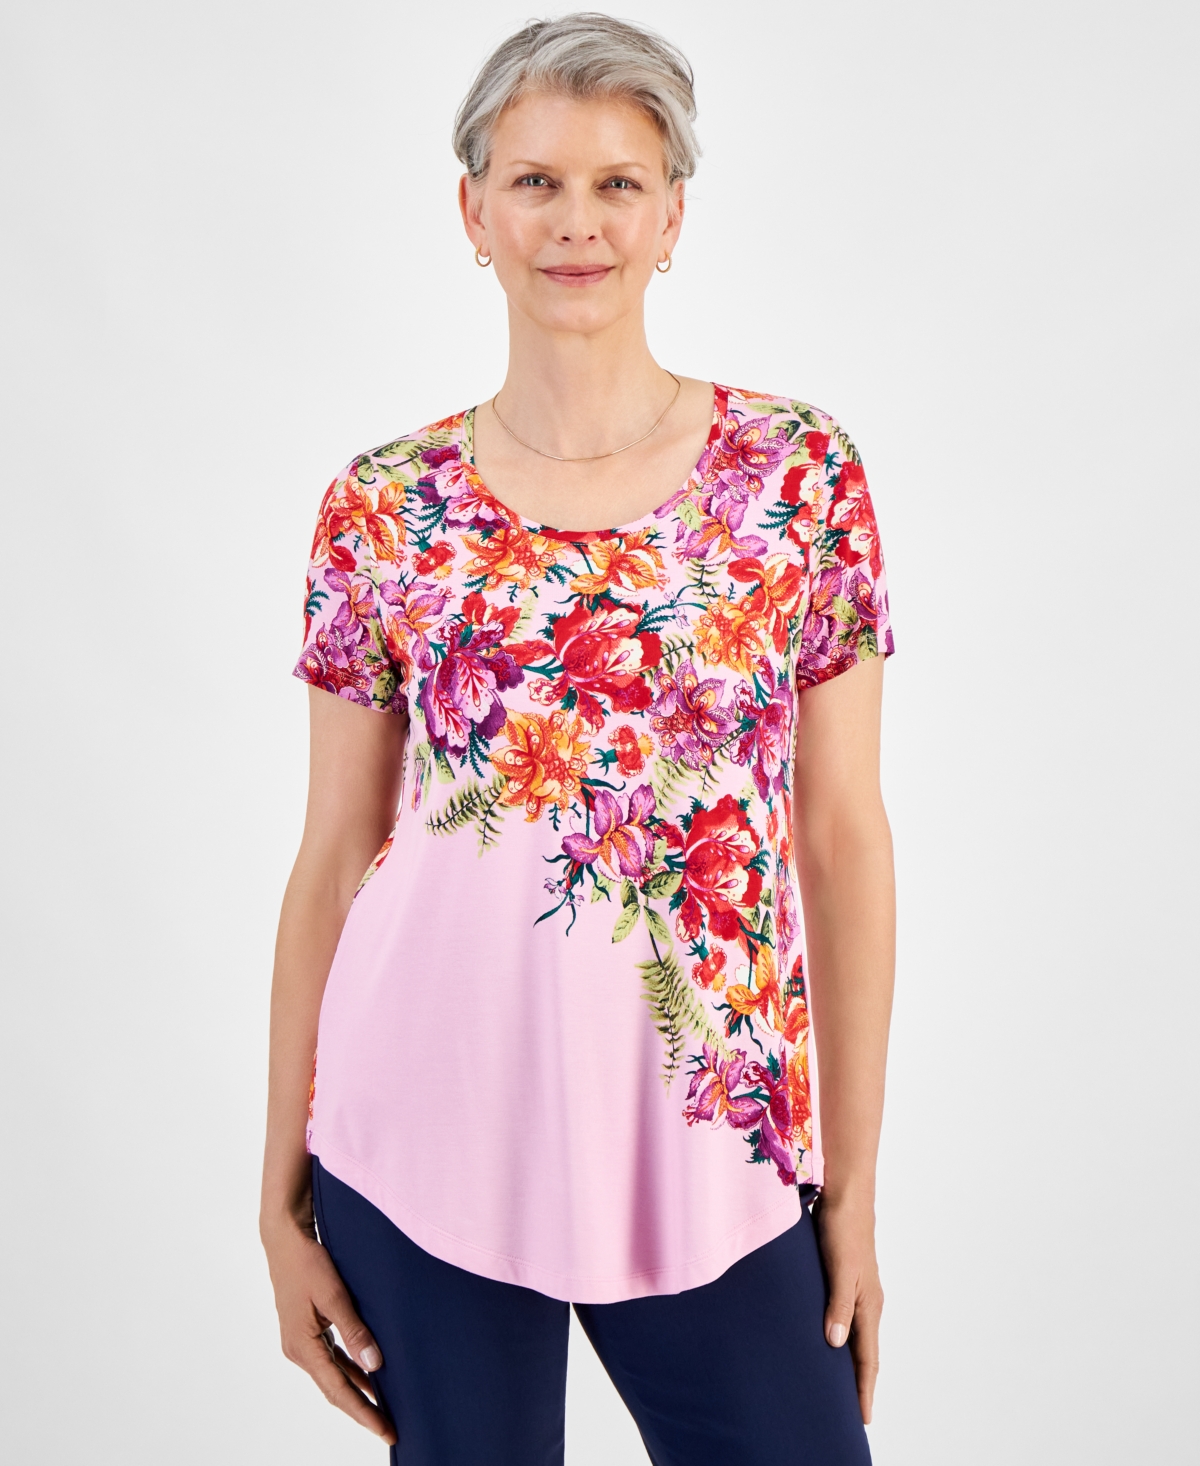 Women's Scoop-Neck Short-Sleeve Printed Knit Top, Created for Macy's - Blosom Berry Combo